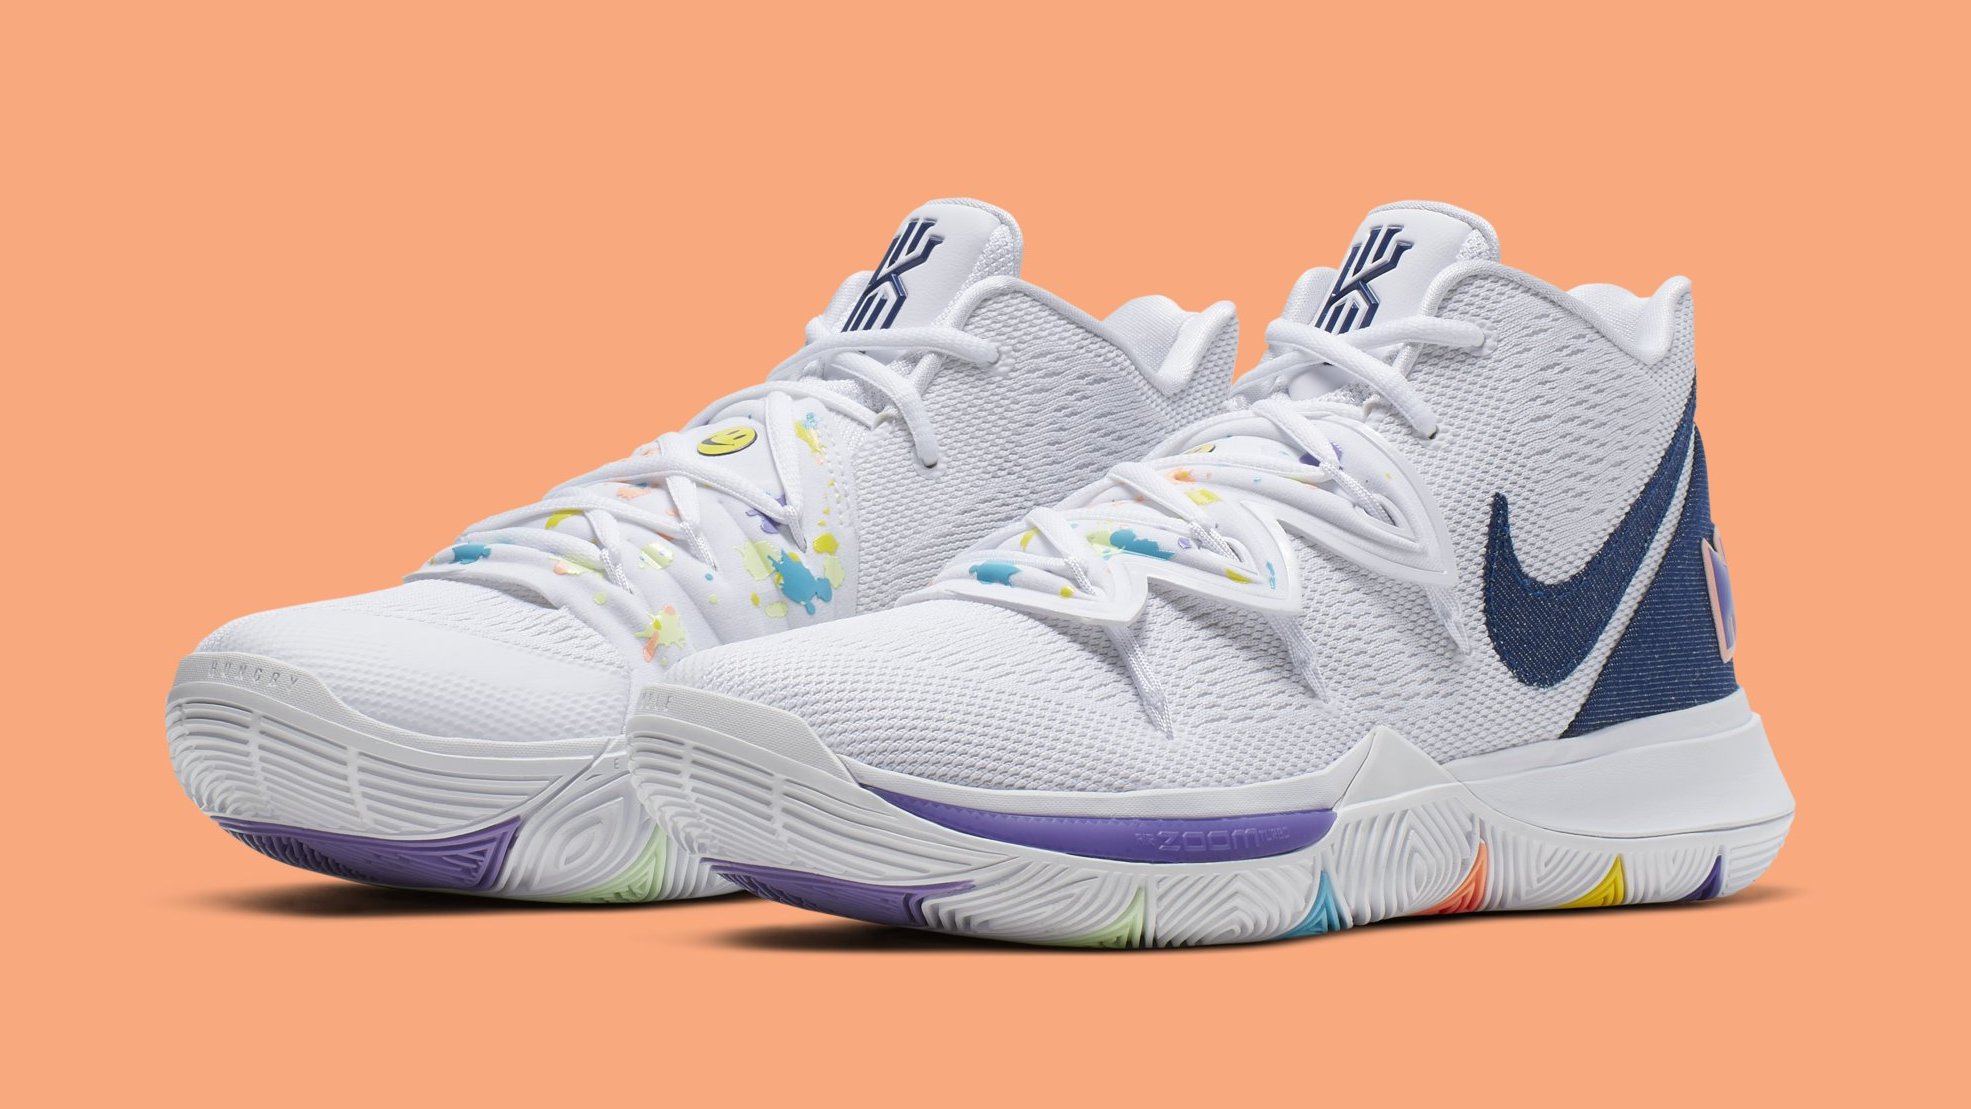 kyrie 5s have a nike day